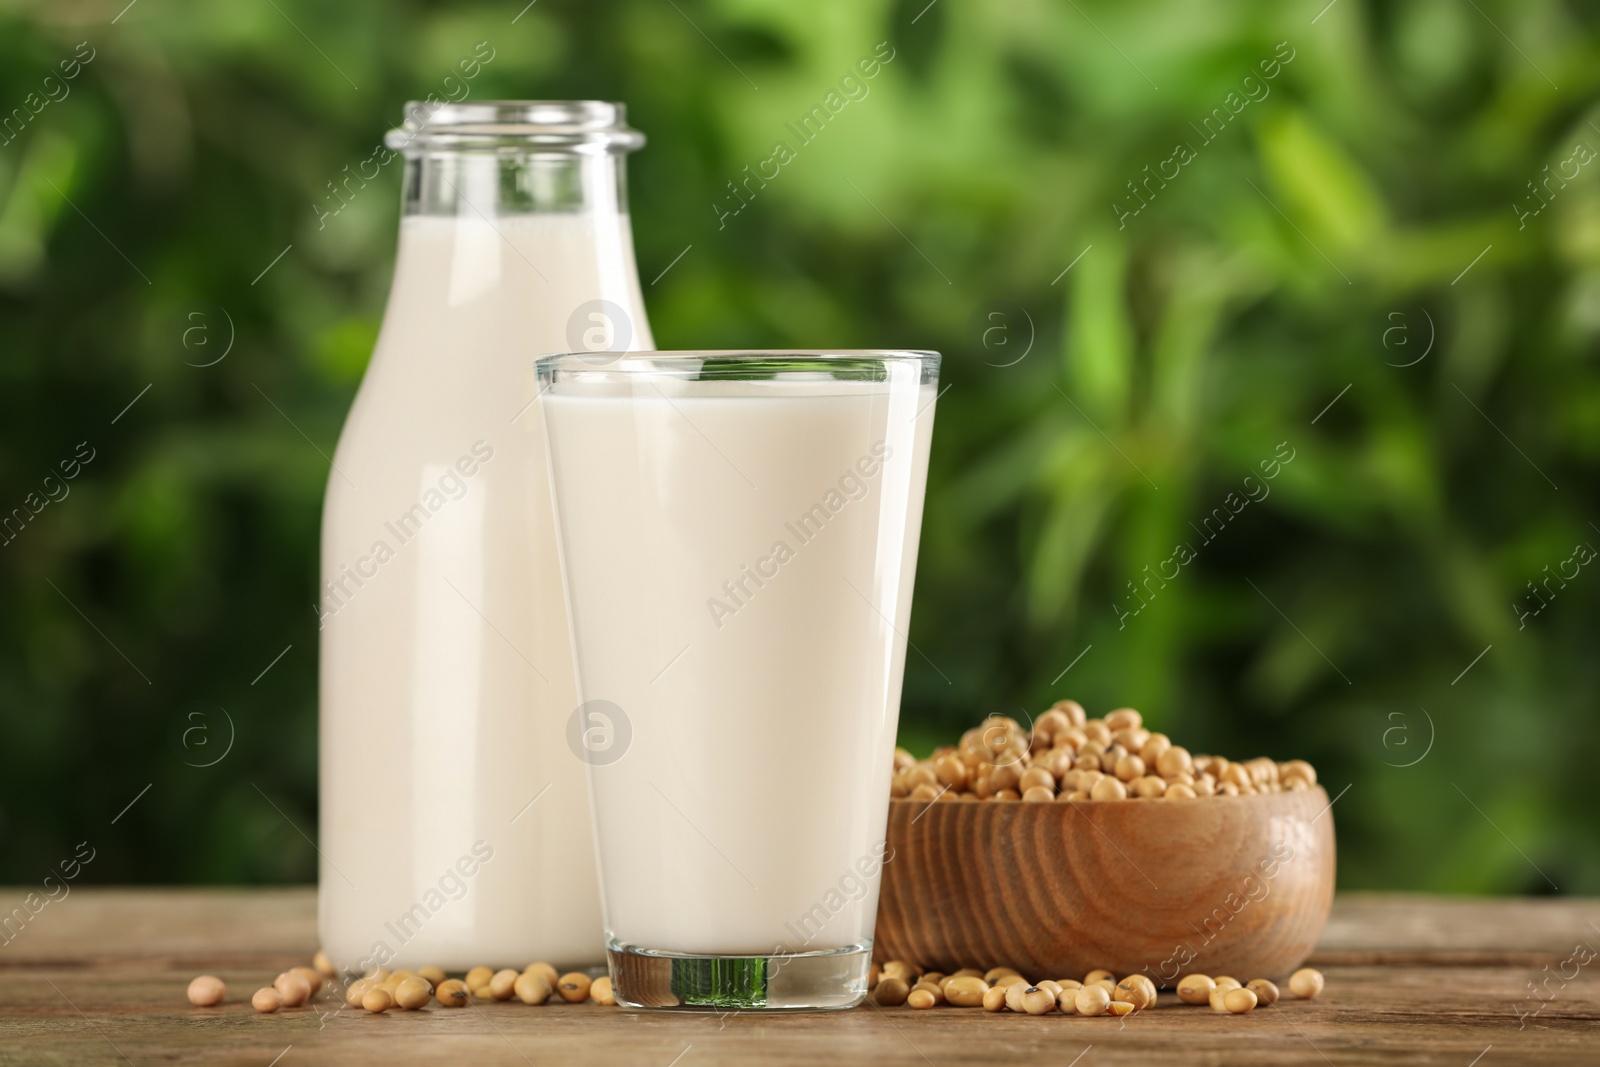 Photo of Fresh soy milk and grains on white wooden table against blurred background